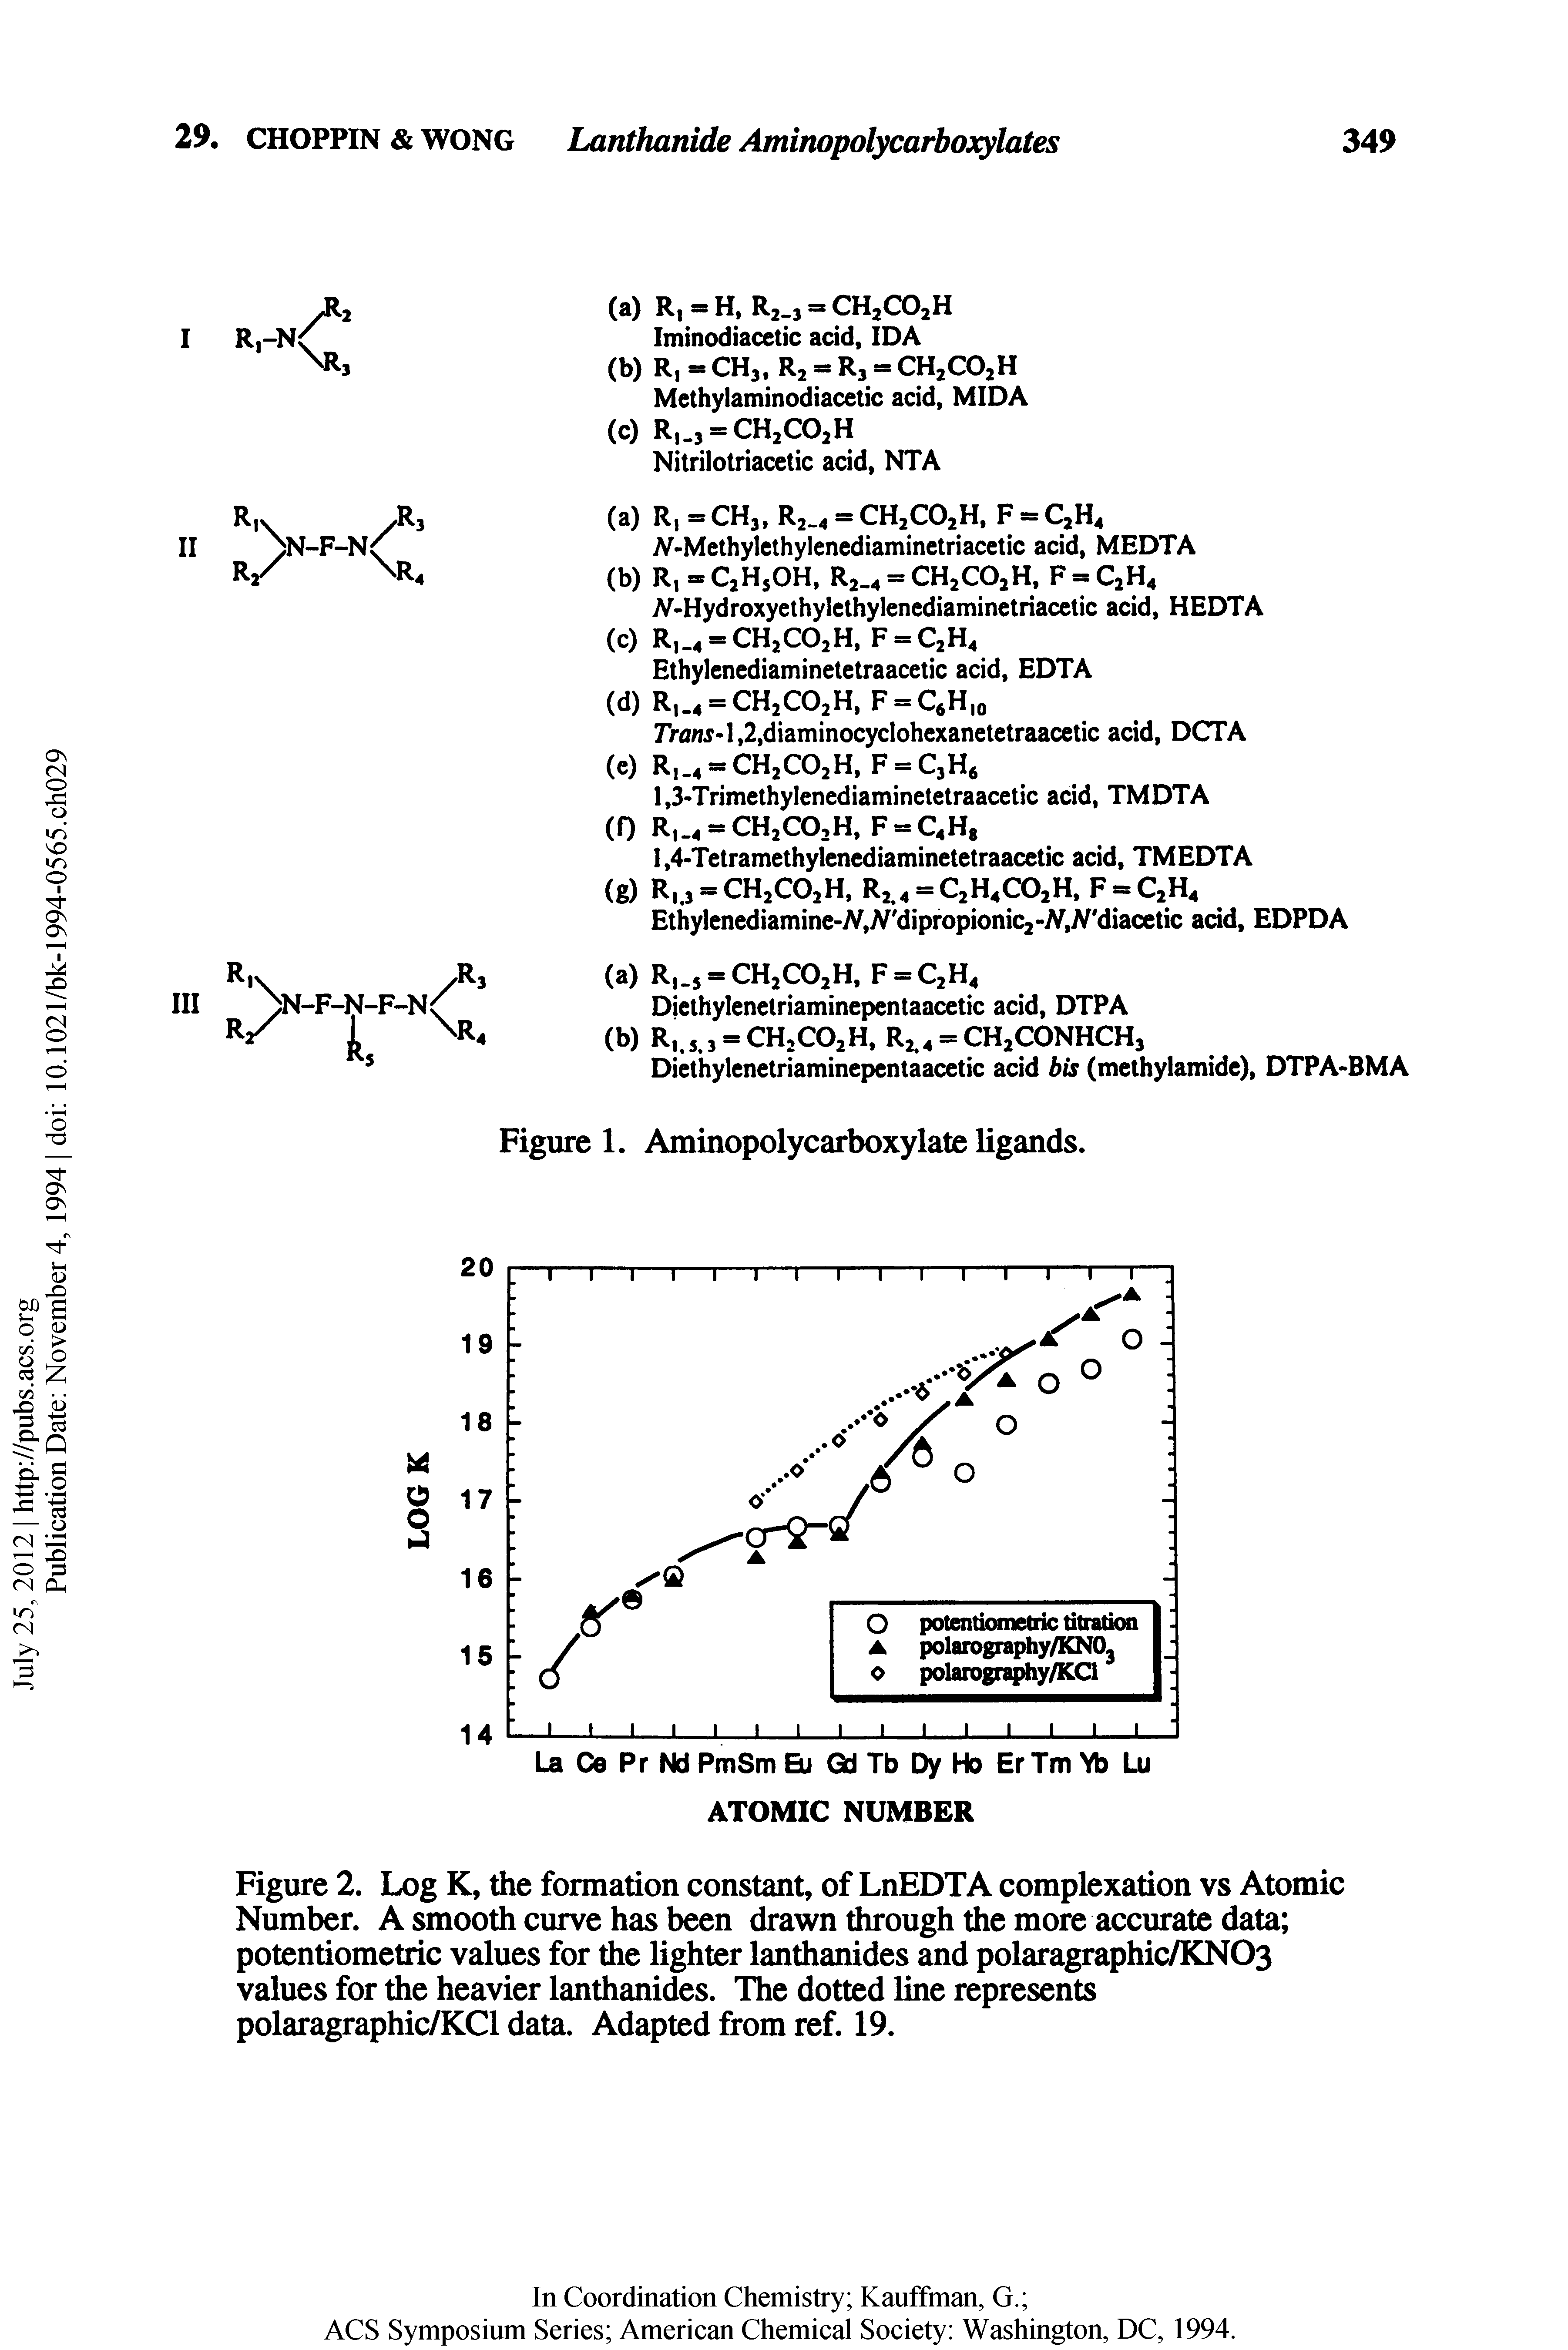 Figure 2. Log K, the formation constant, of LnEDTA complexation vs Atomic Number. A smooth curve has been drawn through the more accurate data potentiometric values for the lighter lanthanides and polaragraphic/KNOs values for the heavier lanthanides. The dotted line represents polaragraphic/KCl data. Adapted from ref. 19.